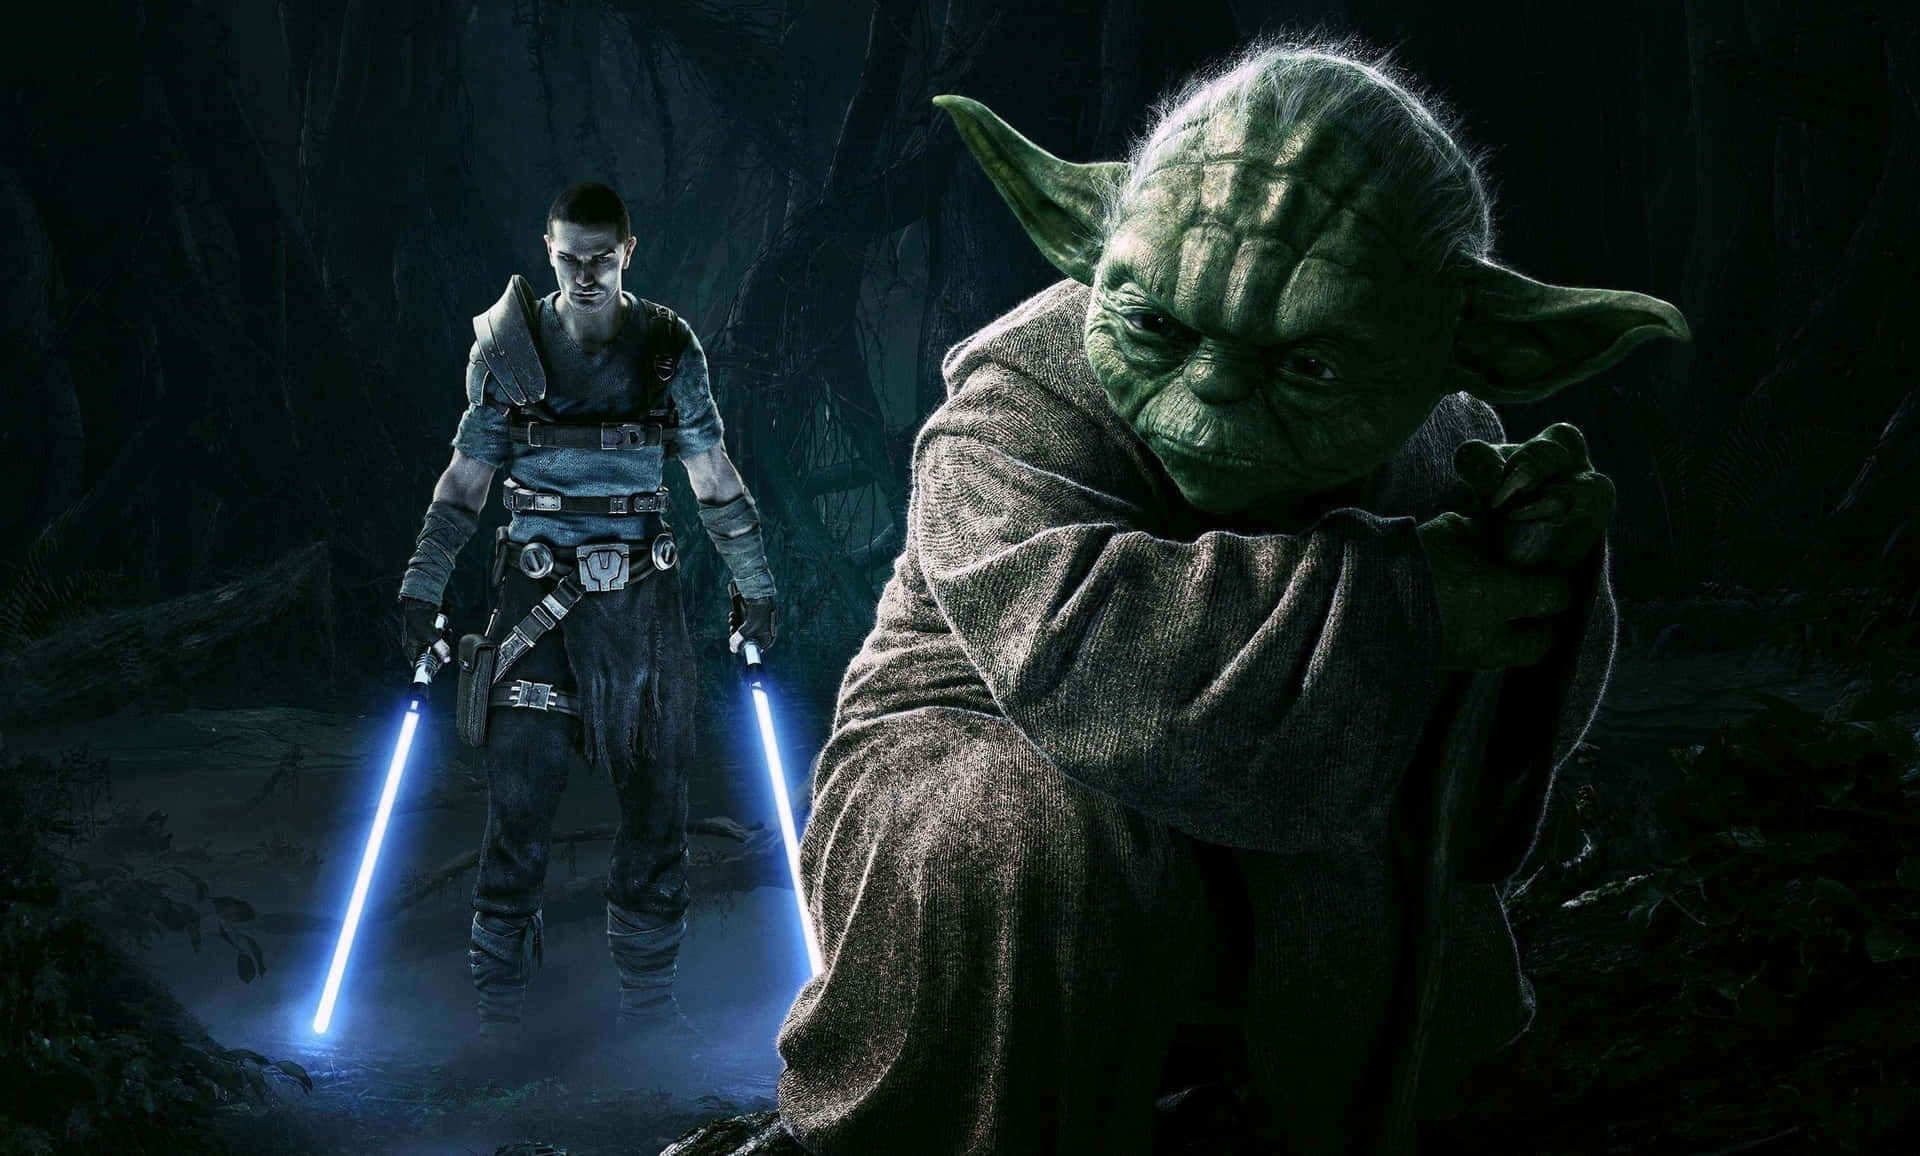 "Do or do not. There is no try." - Yoda